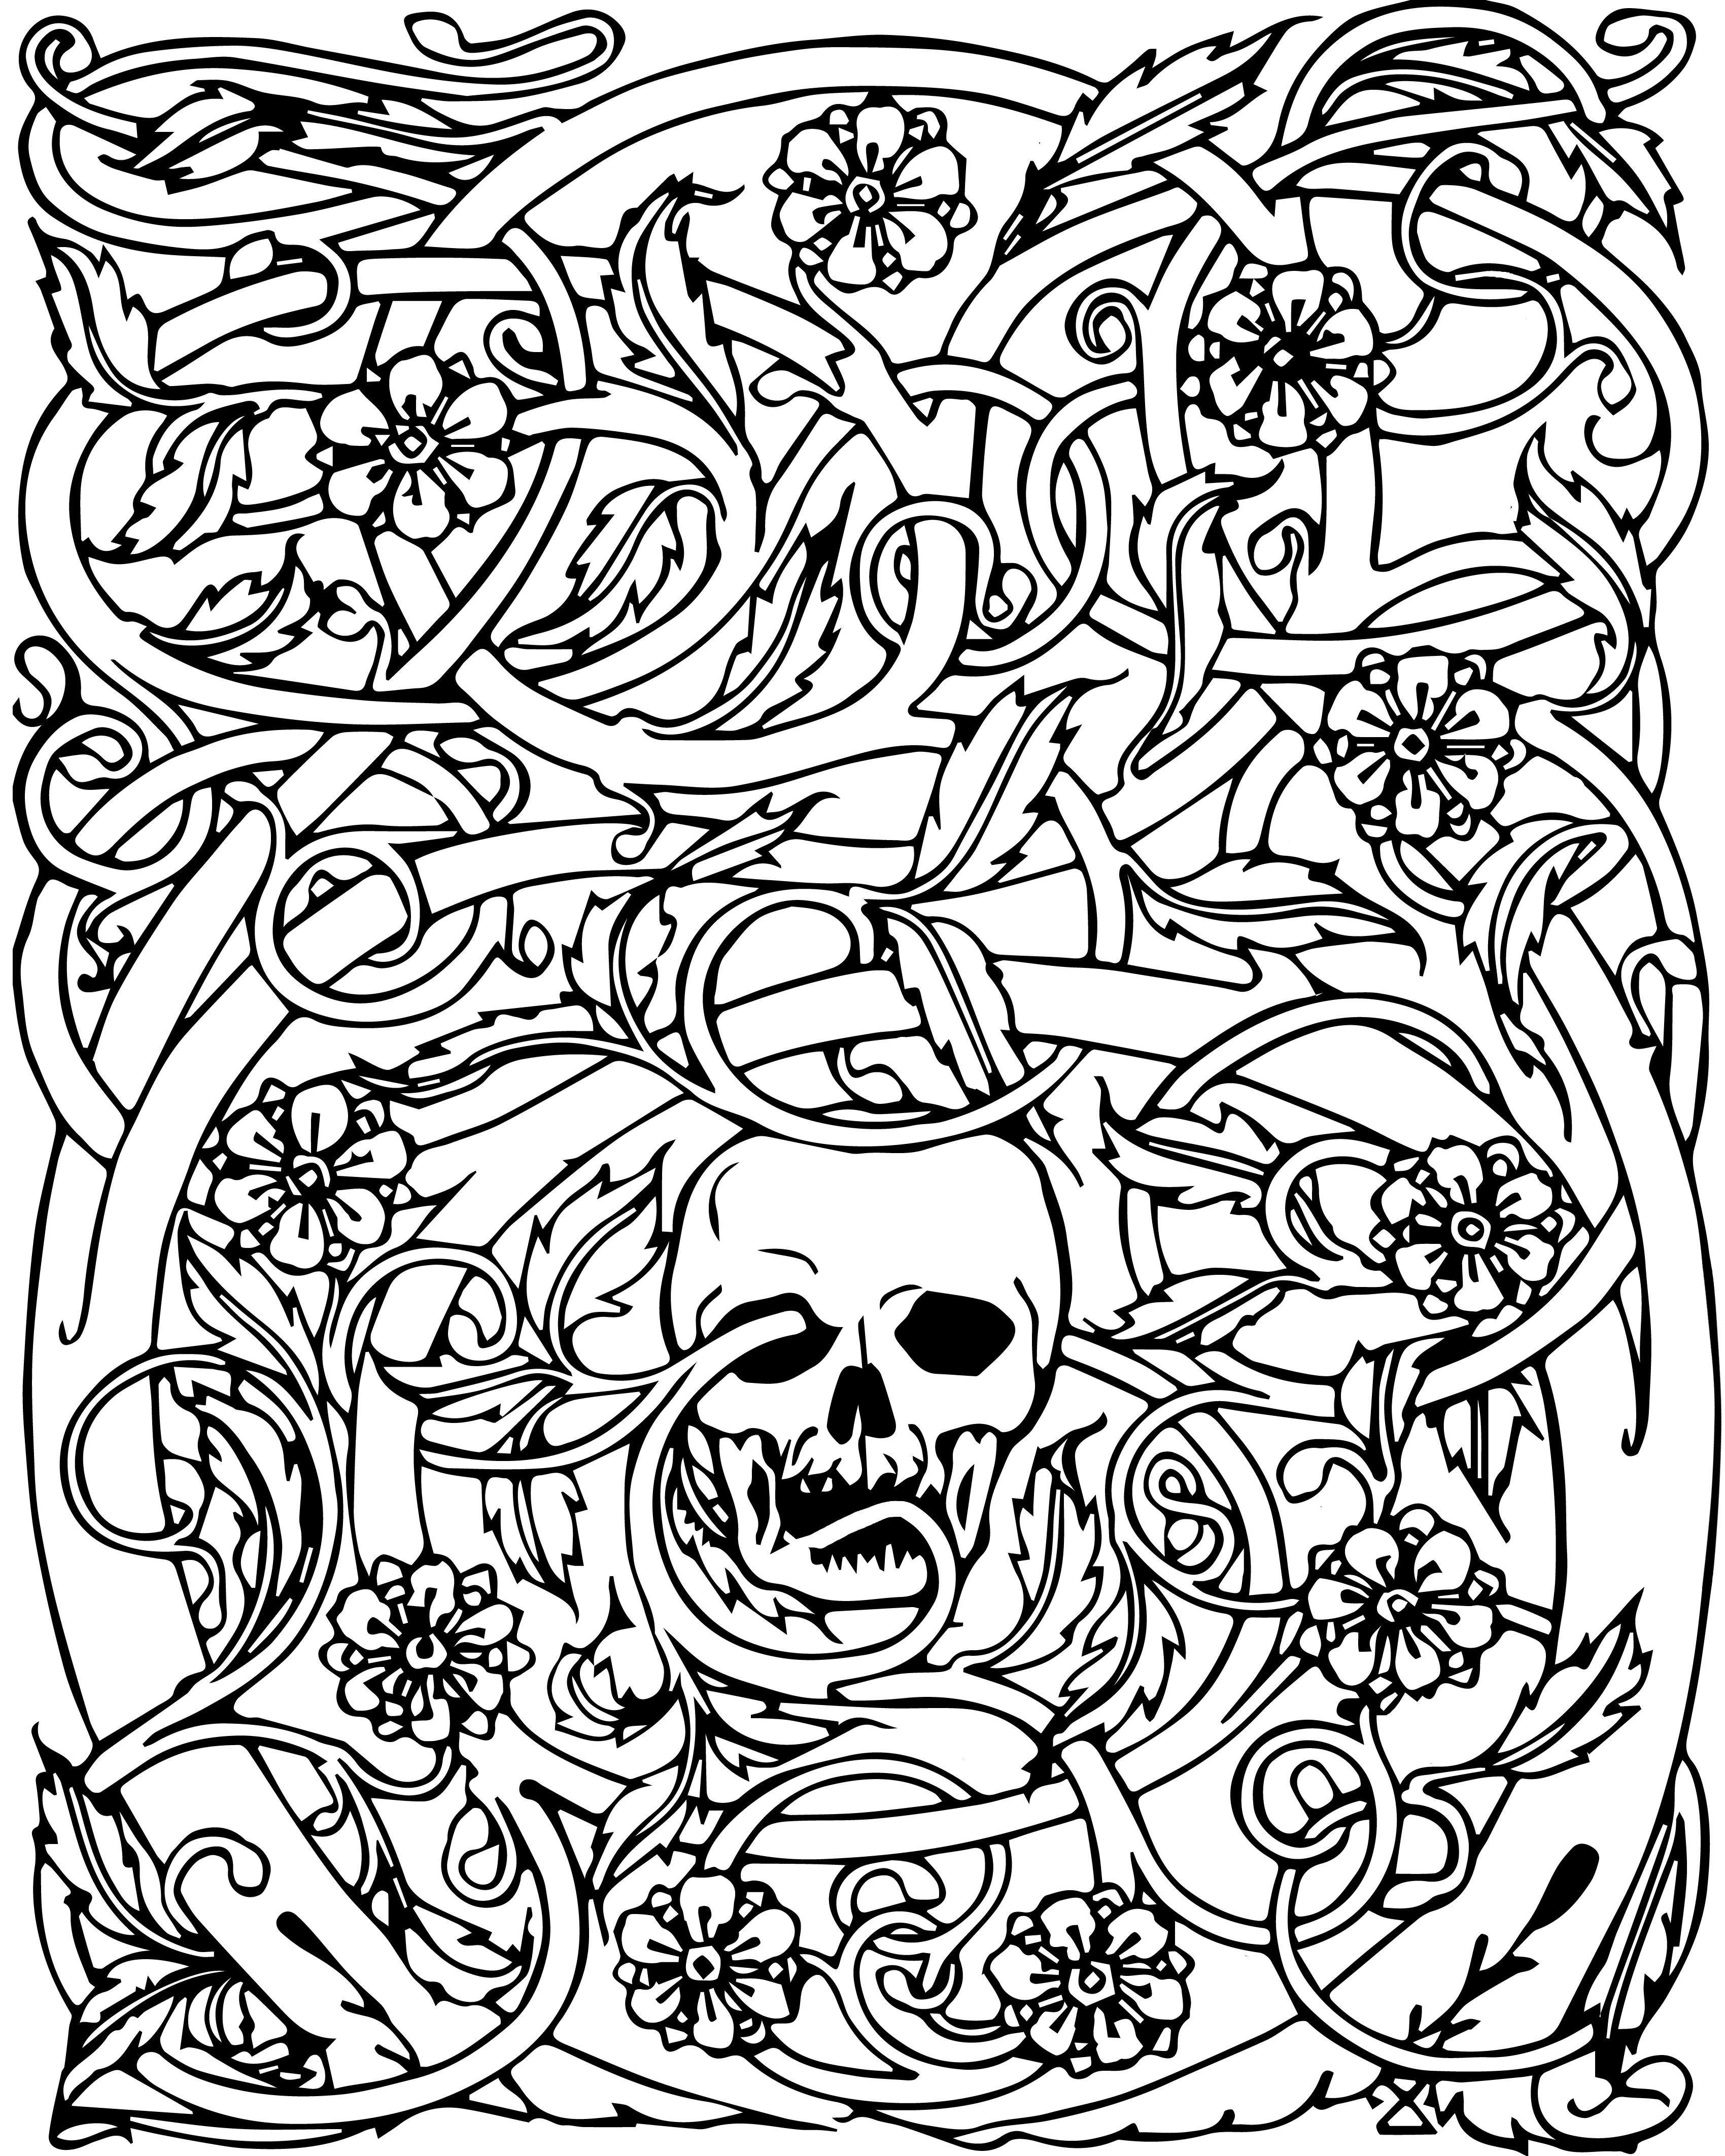 Printable Horror Movie Coloring Pages - Printable World Holiday